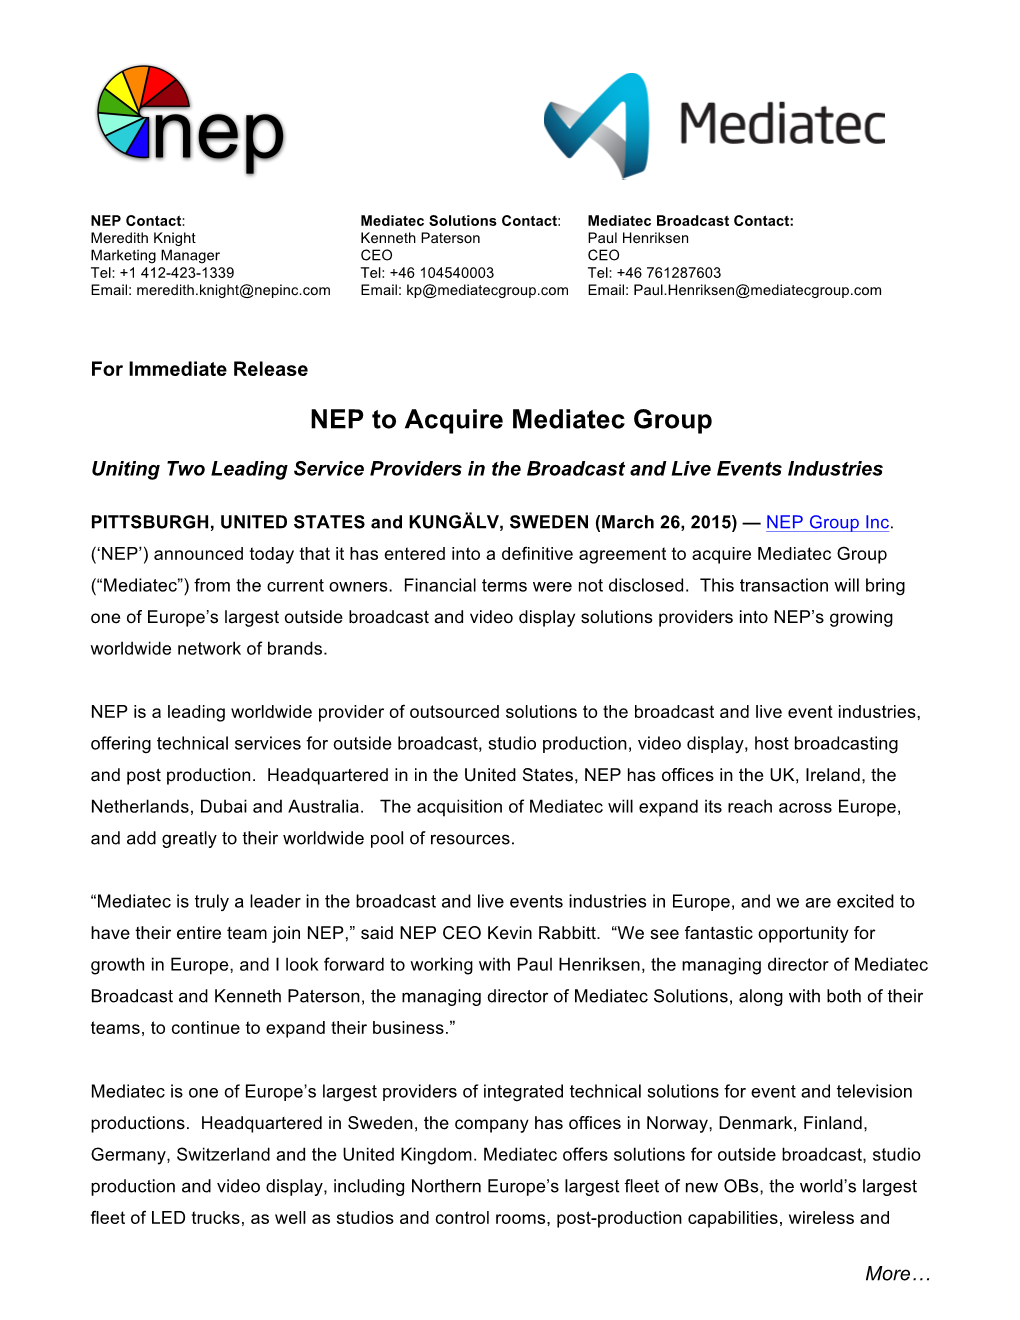 NEP to Acquire Mediatec Group